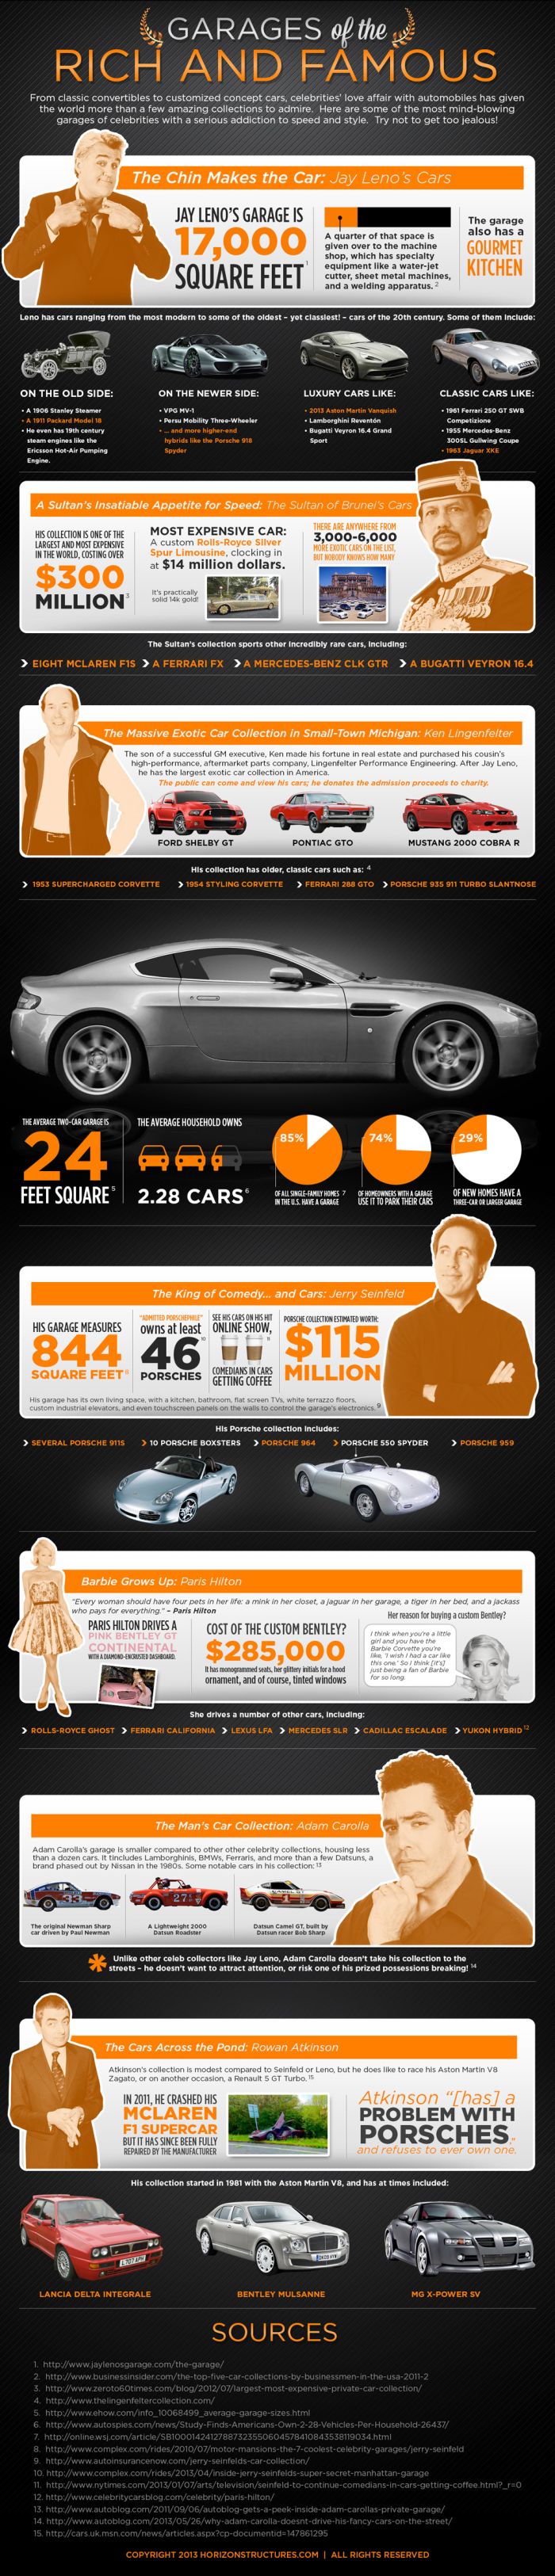 Garages of the Rich and Famous (infographic)